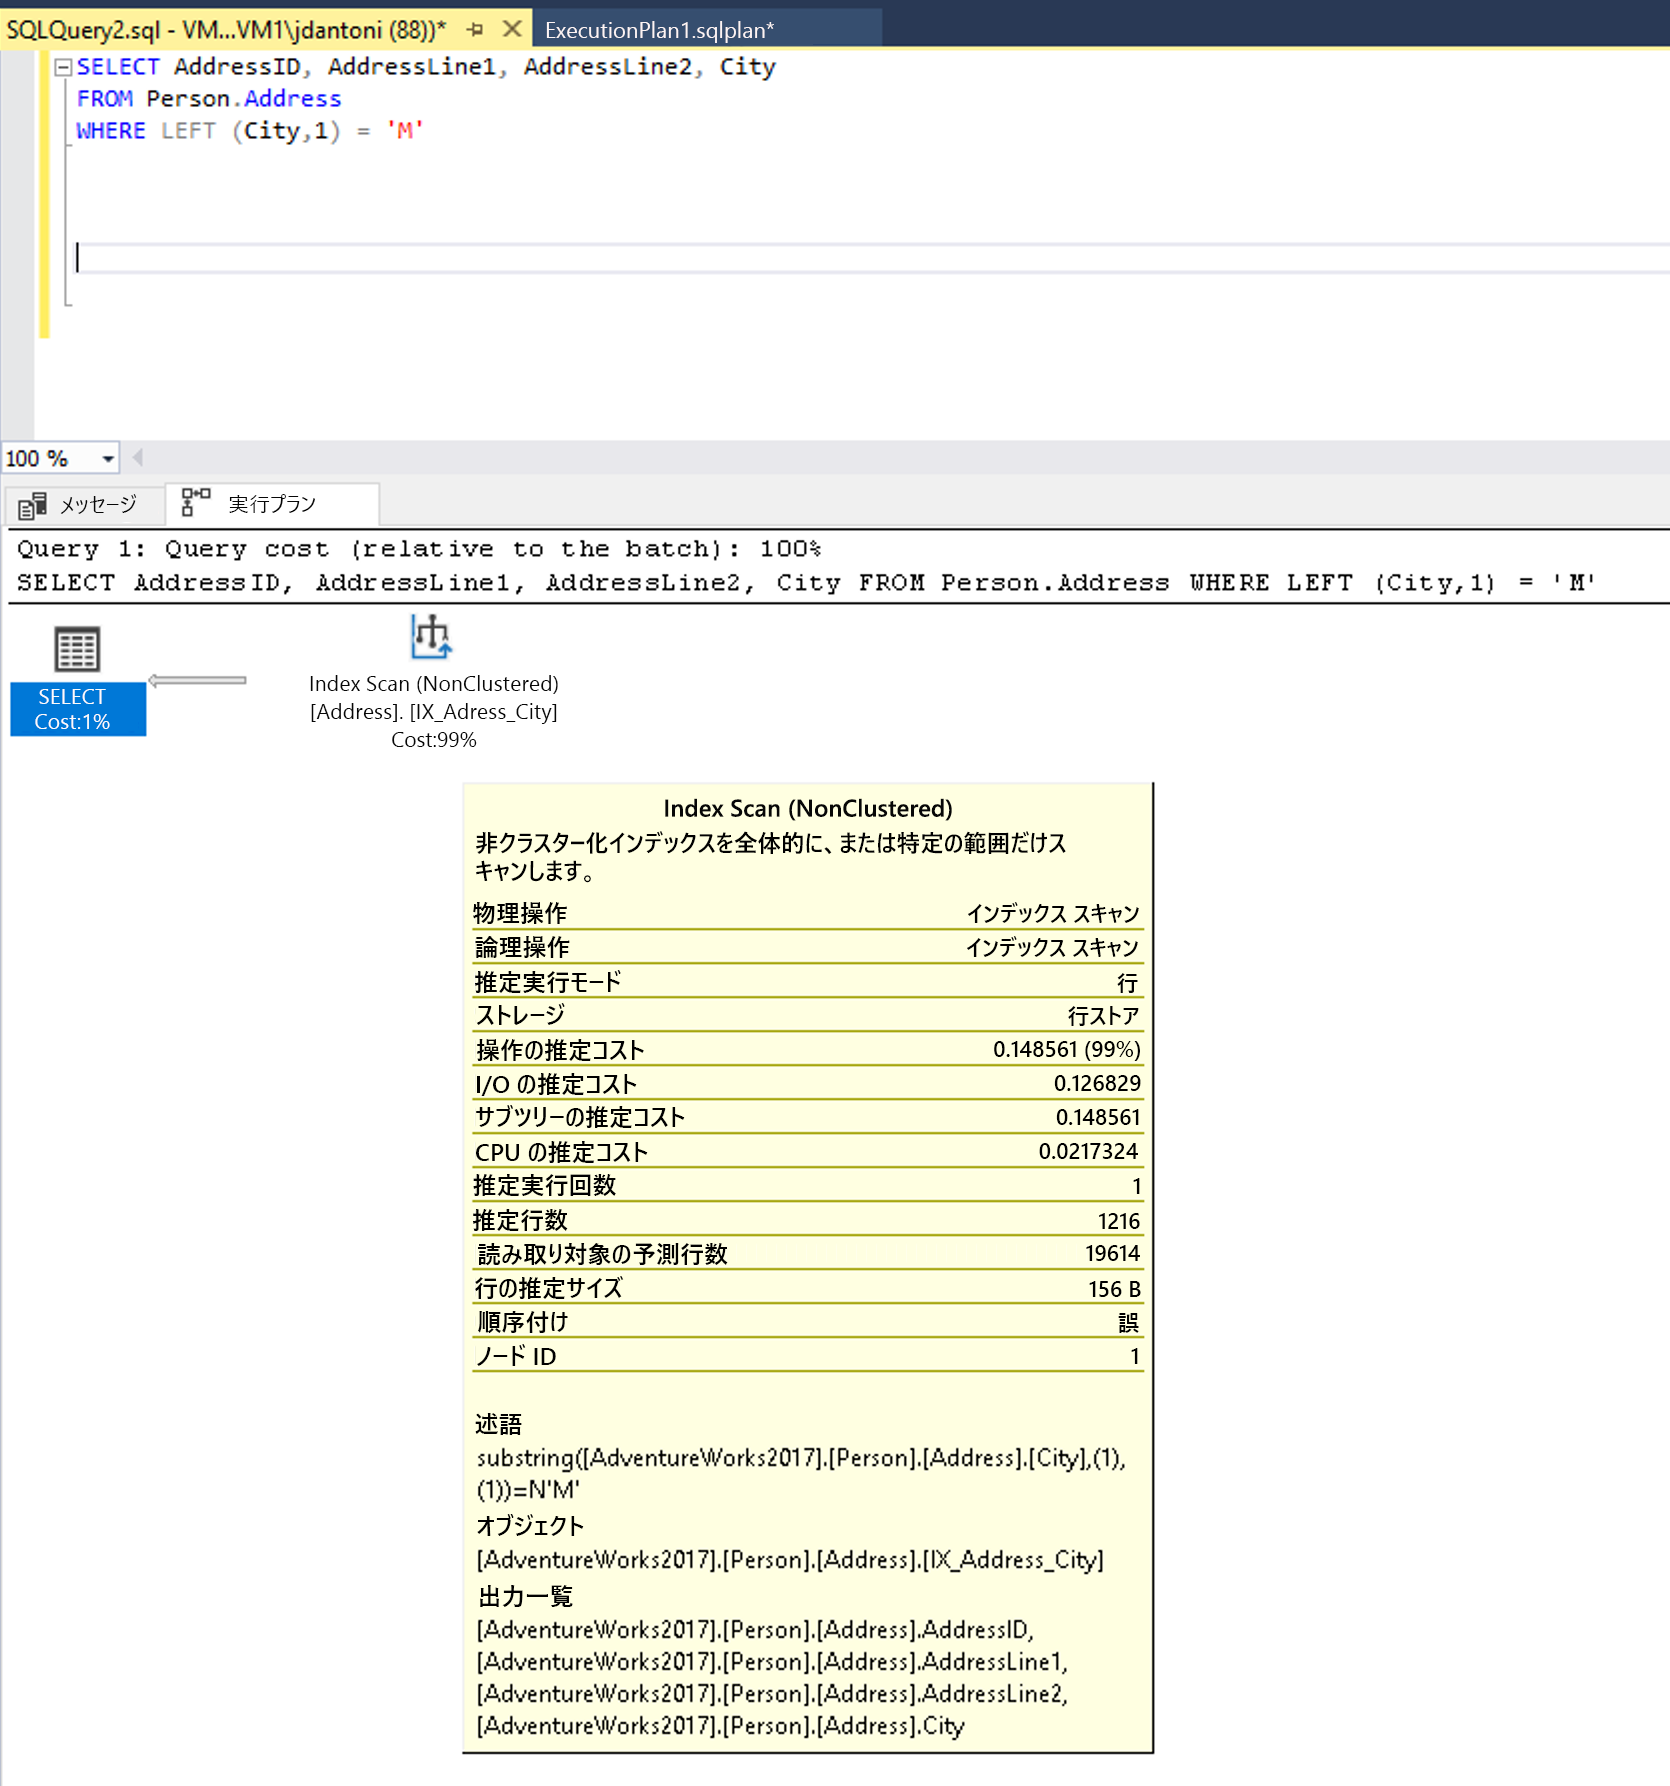 Screenshot of query and execution plan using a non-SARGable function.